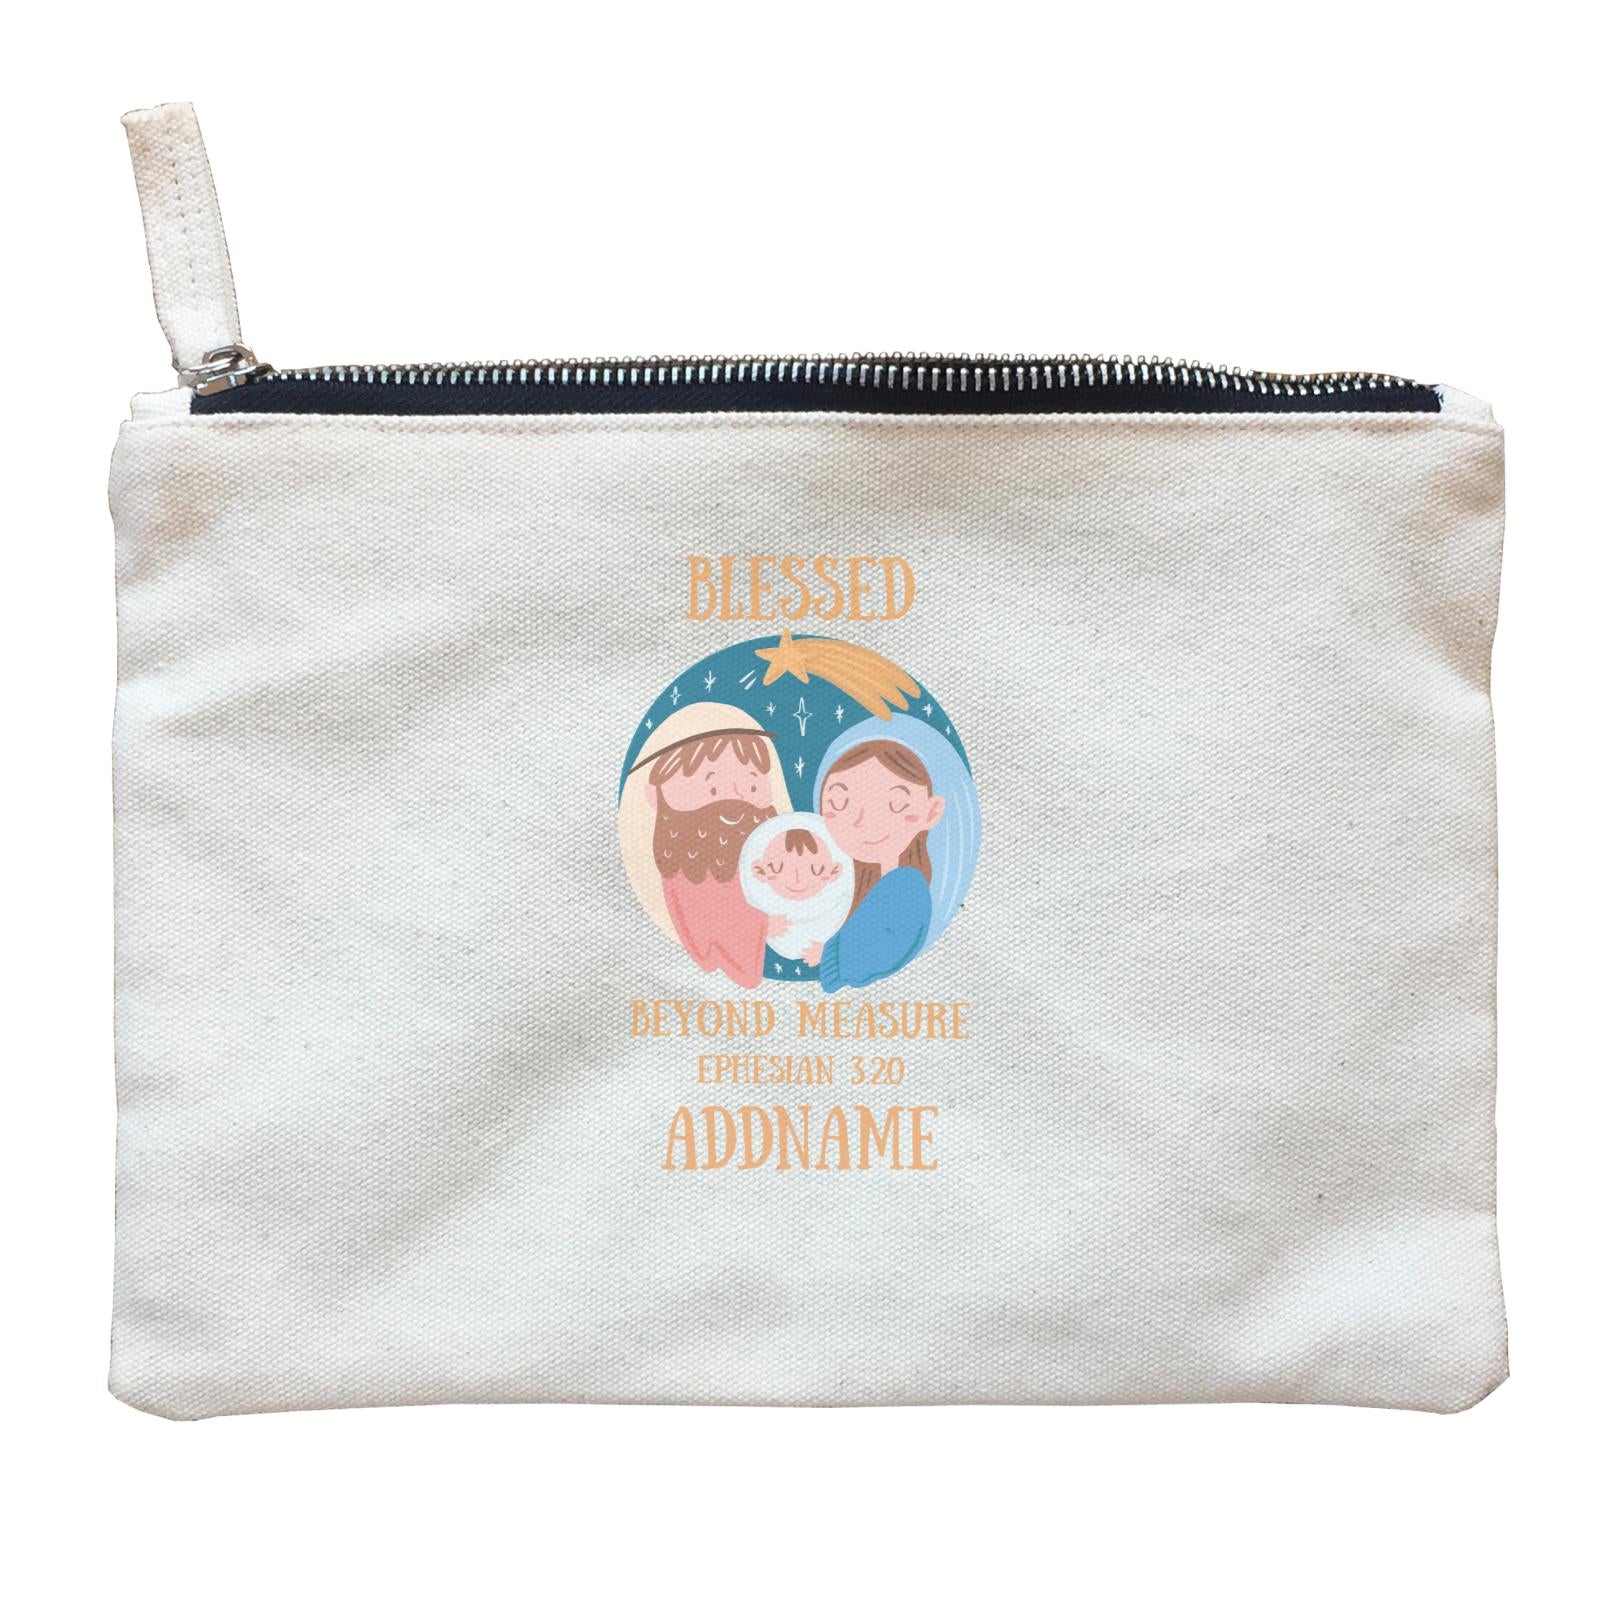 Gods GIft Blessed Beyond Measure Ephesian 3.20 Addname Zipper Pouch